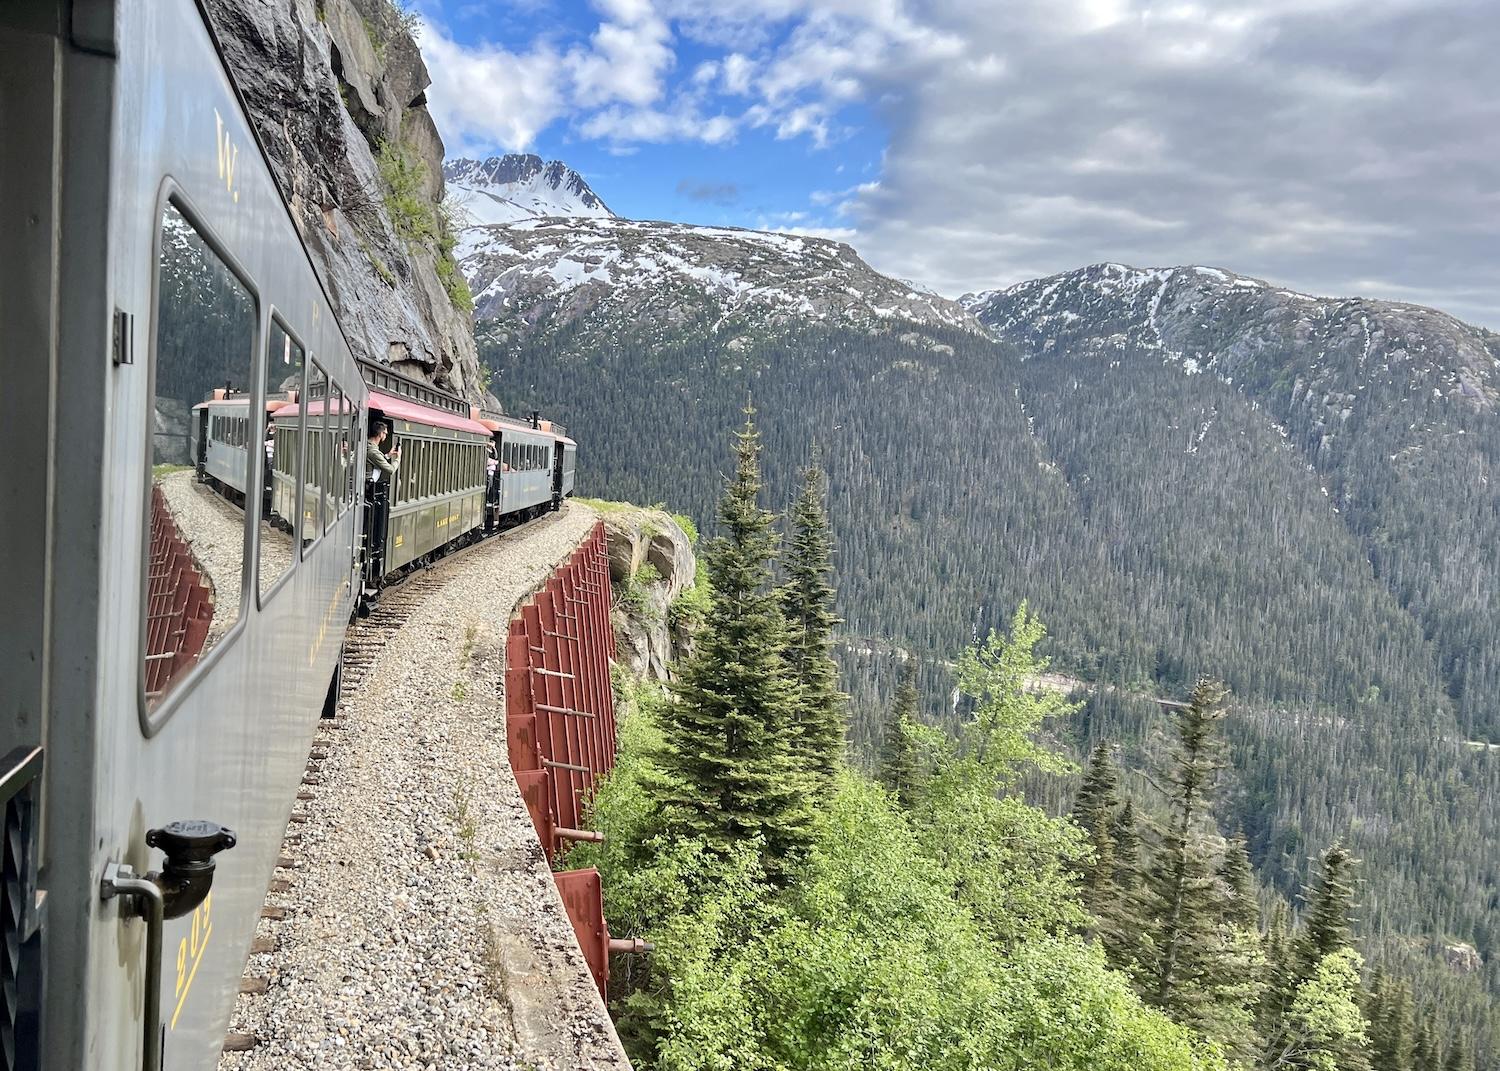 In Skagway, the White Pass & Yukon Route Railway now takes tourists to the White Pass Summit along what was once a Klondike gold rush foot path.